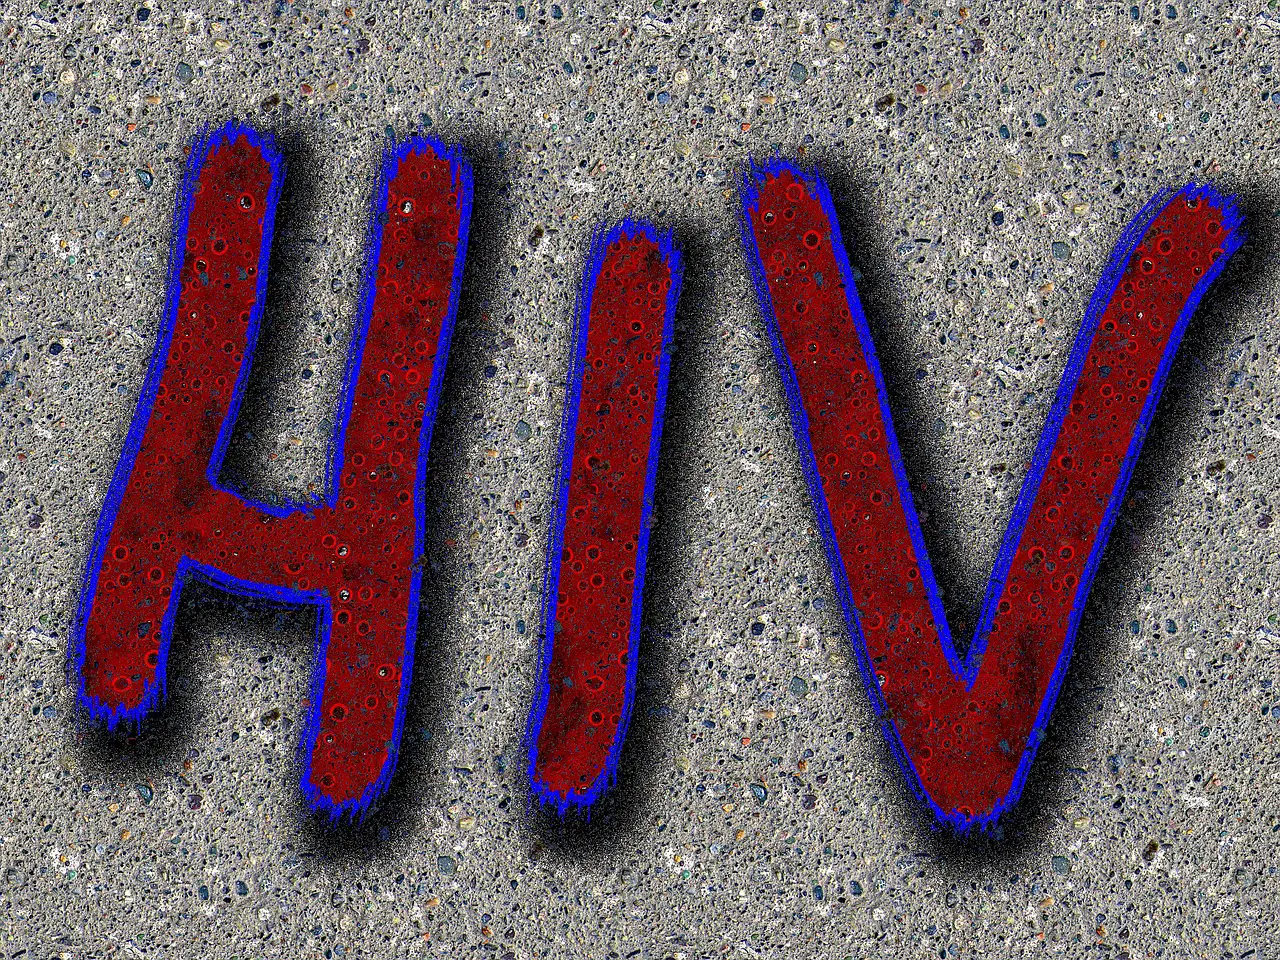 New HIV/AIDS Facility in the Philippines